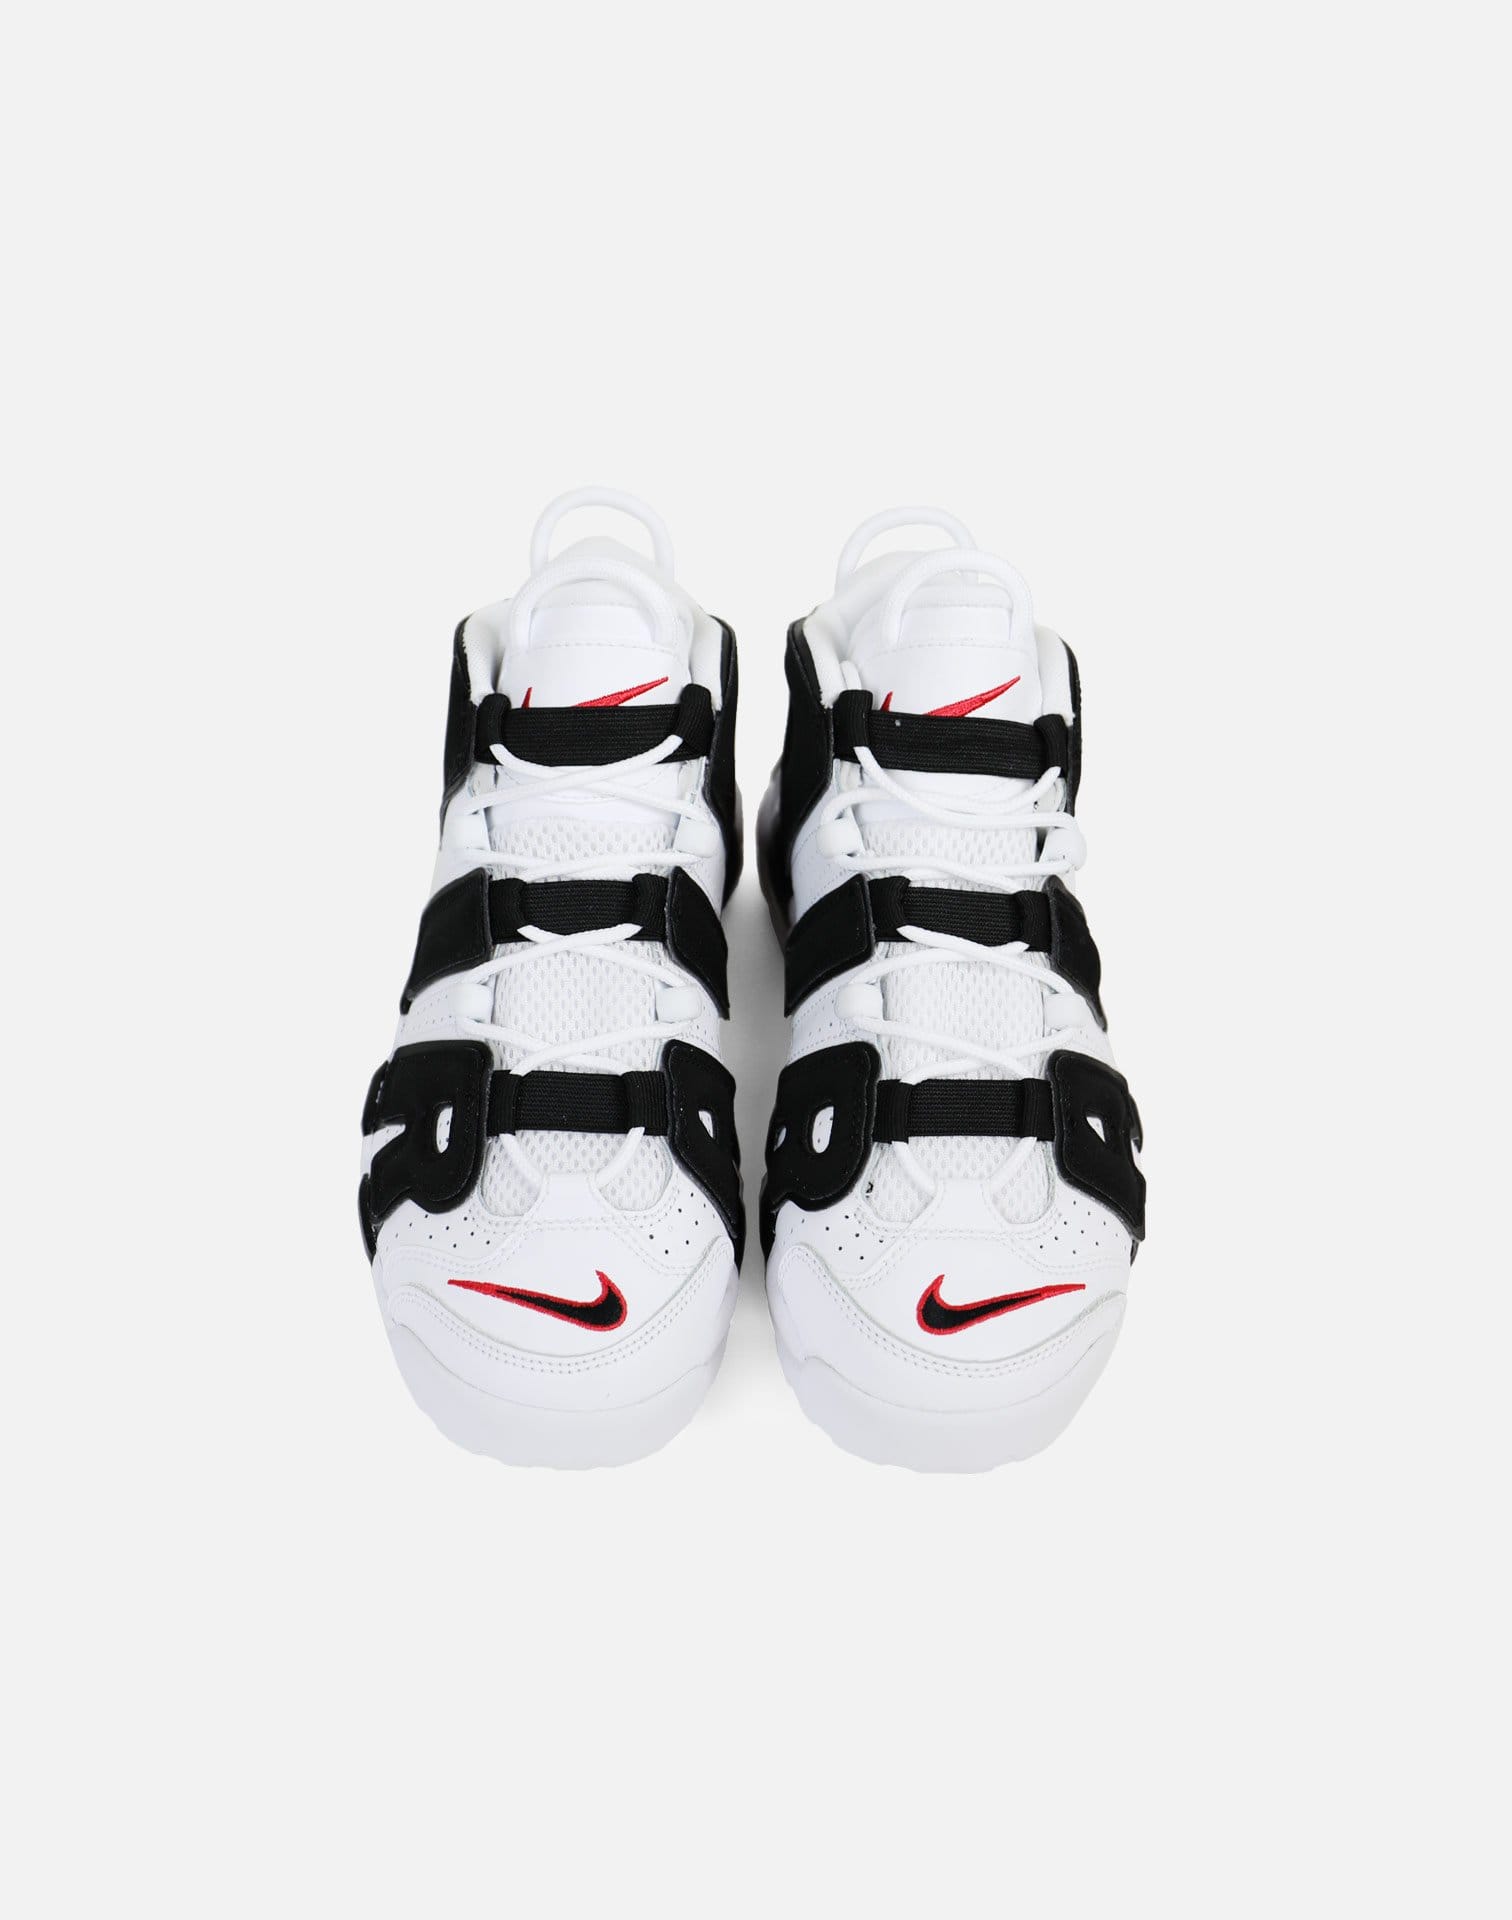 RUVilla.com is where to buy the Nike Air More Uptempo Grade-School (White/Black-Varsity Red)!